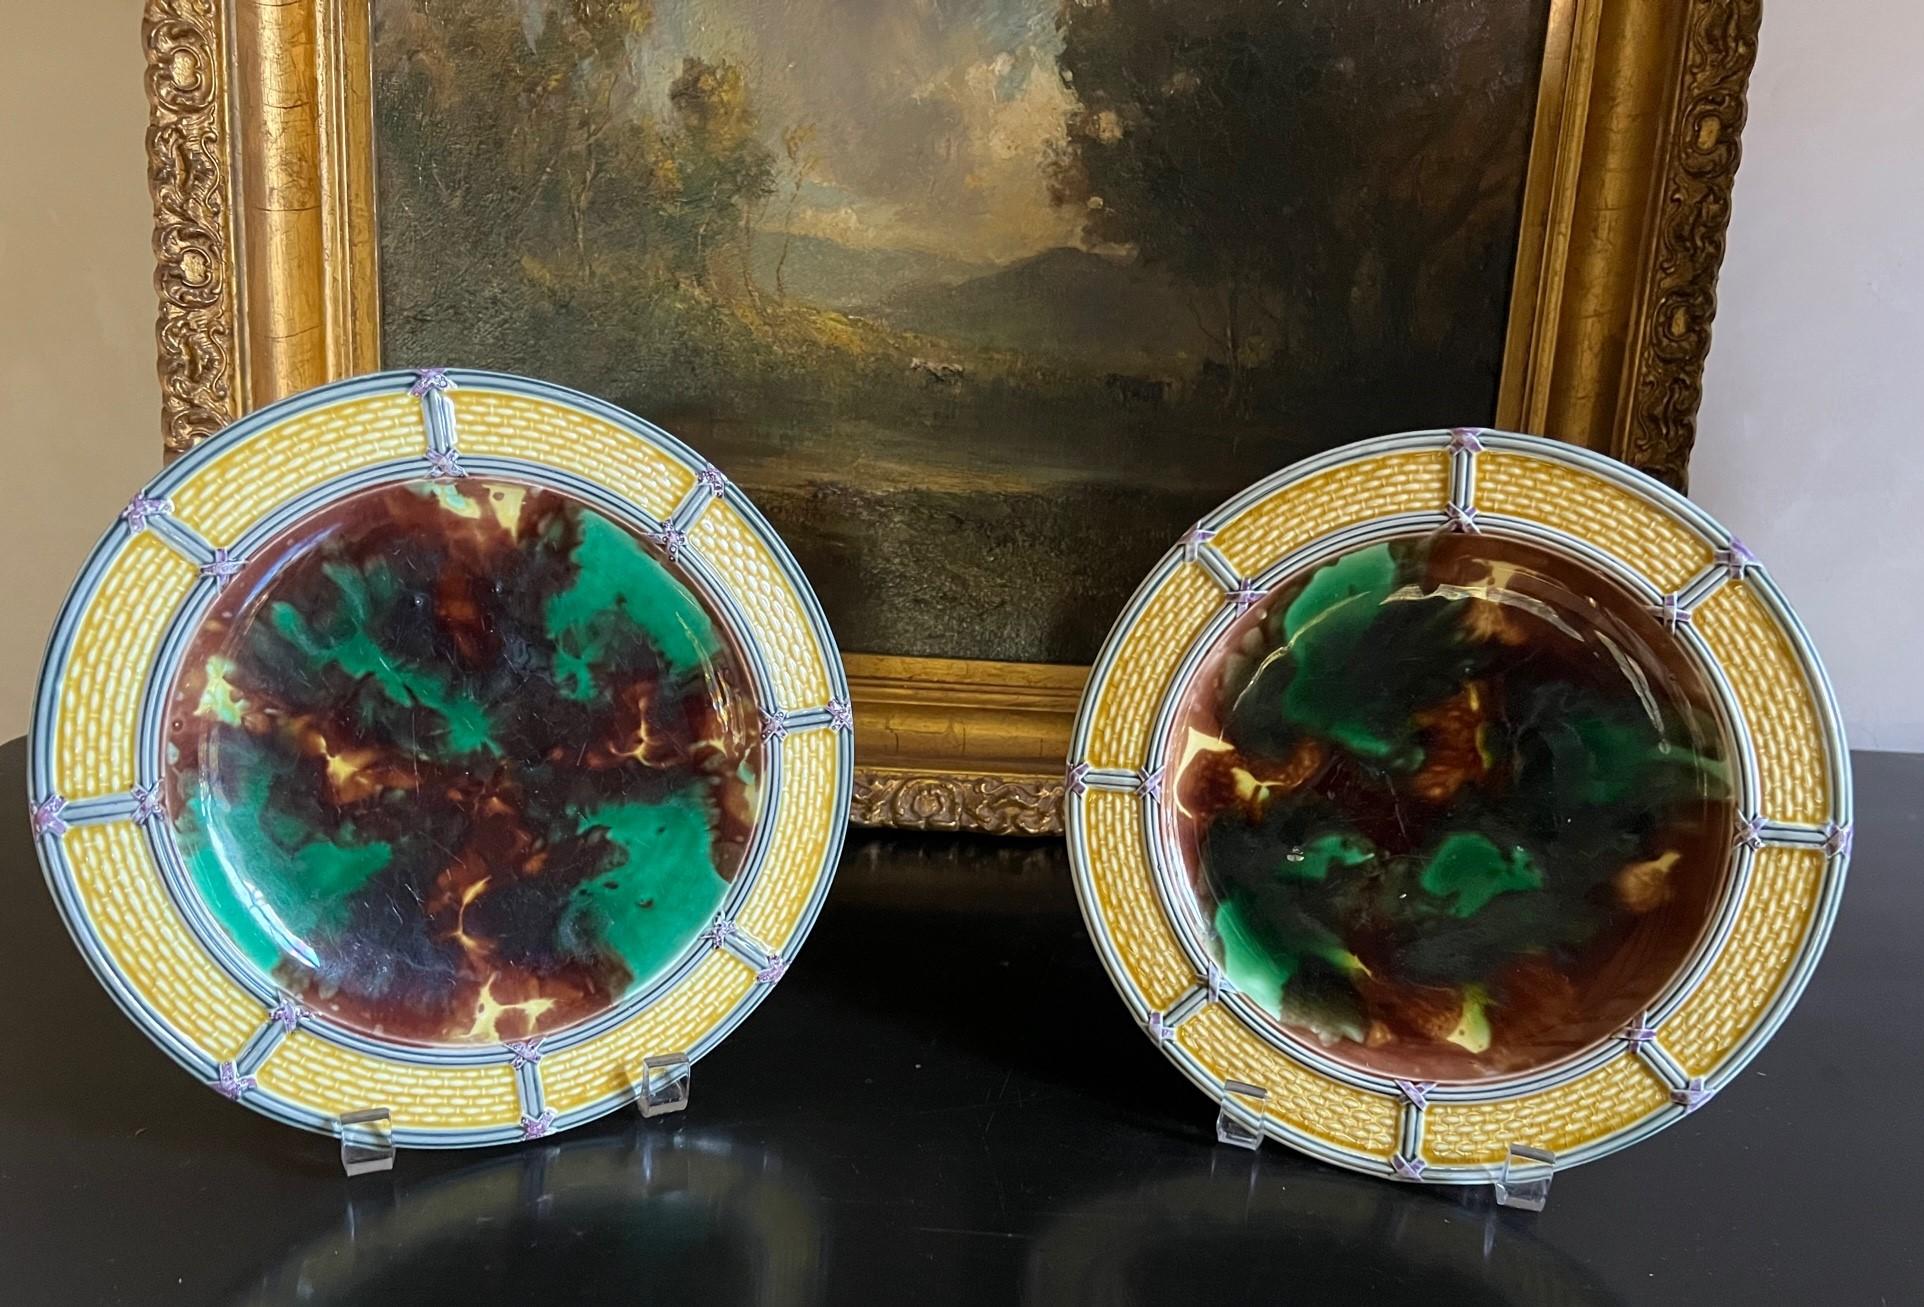 Hand-Painted Wedgwood Antique English Majolica Plate, C. 1872